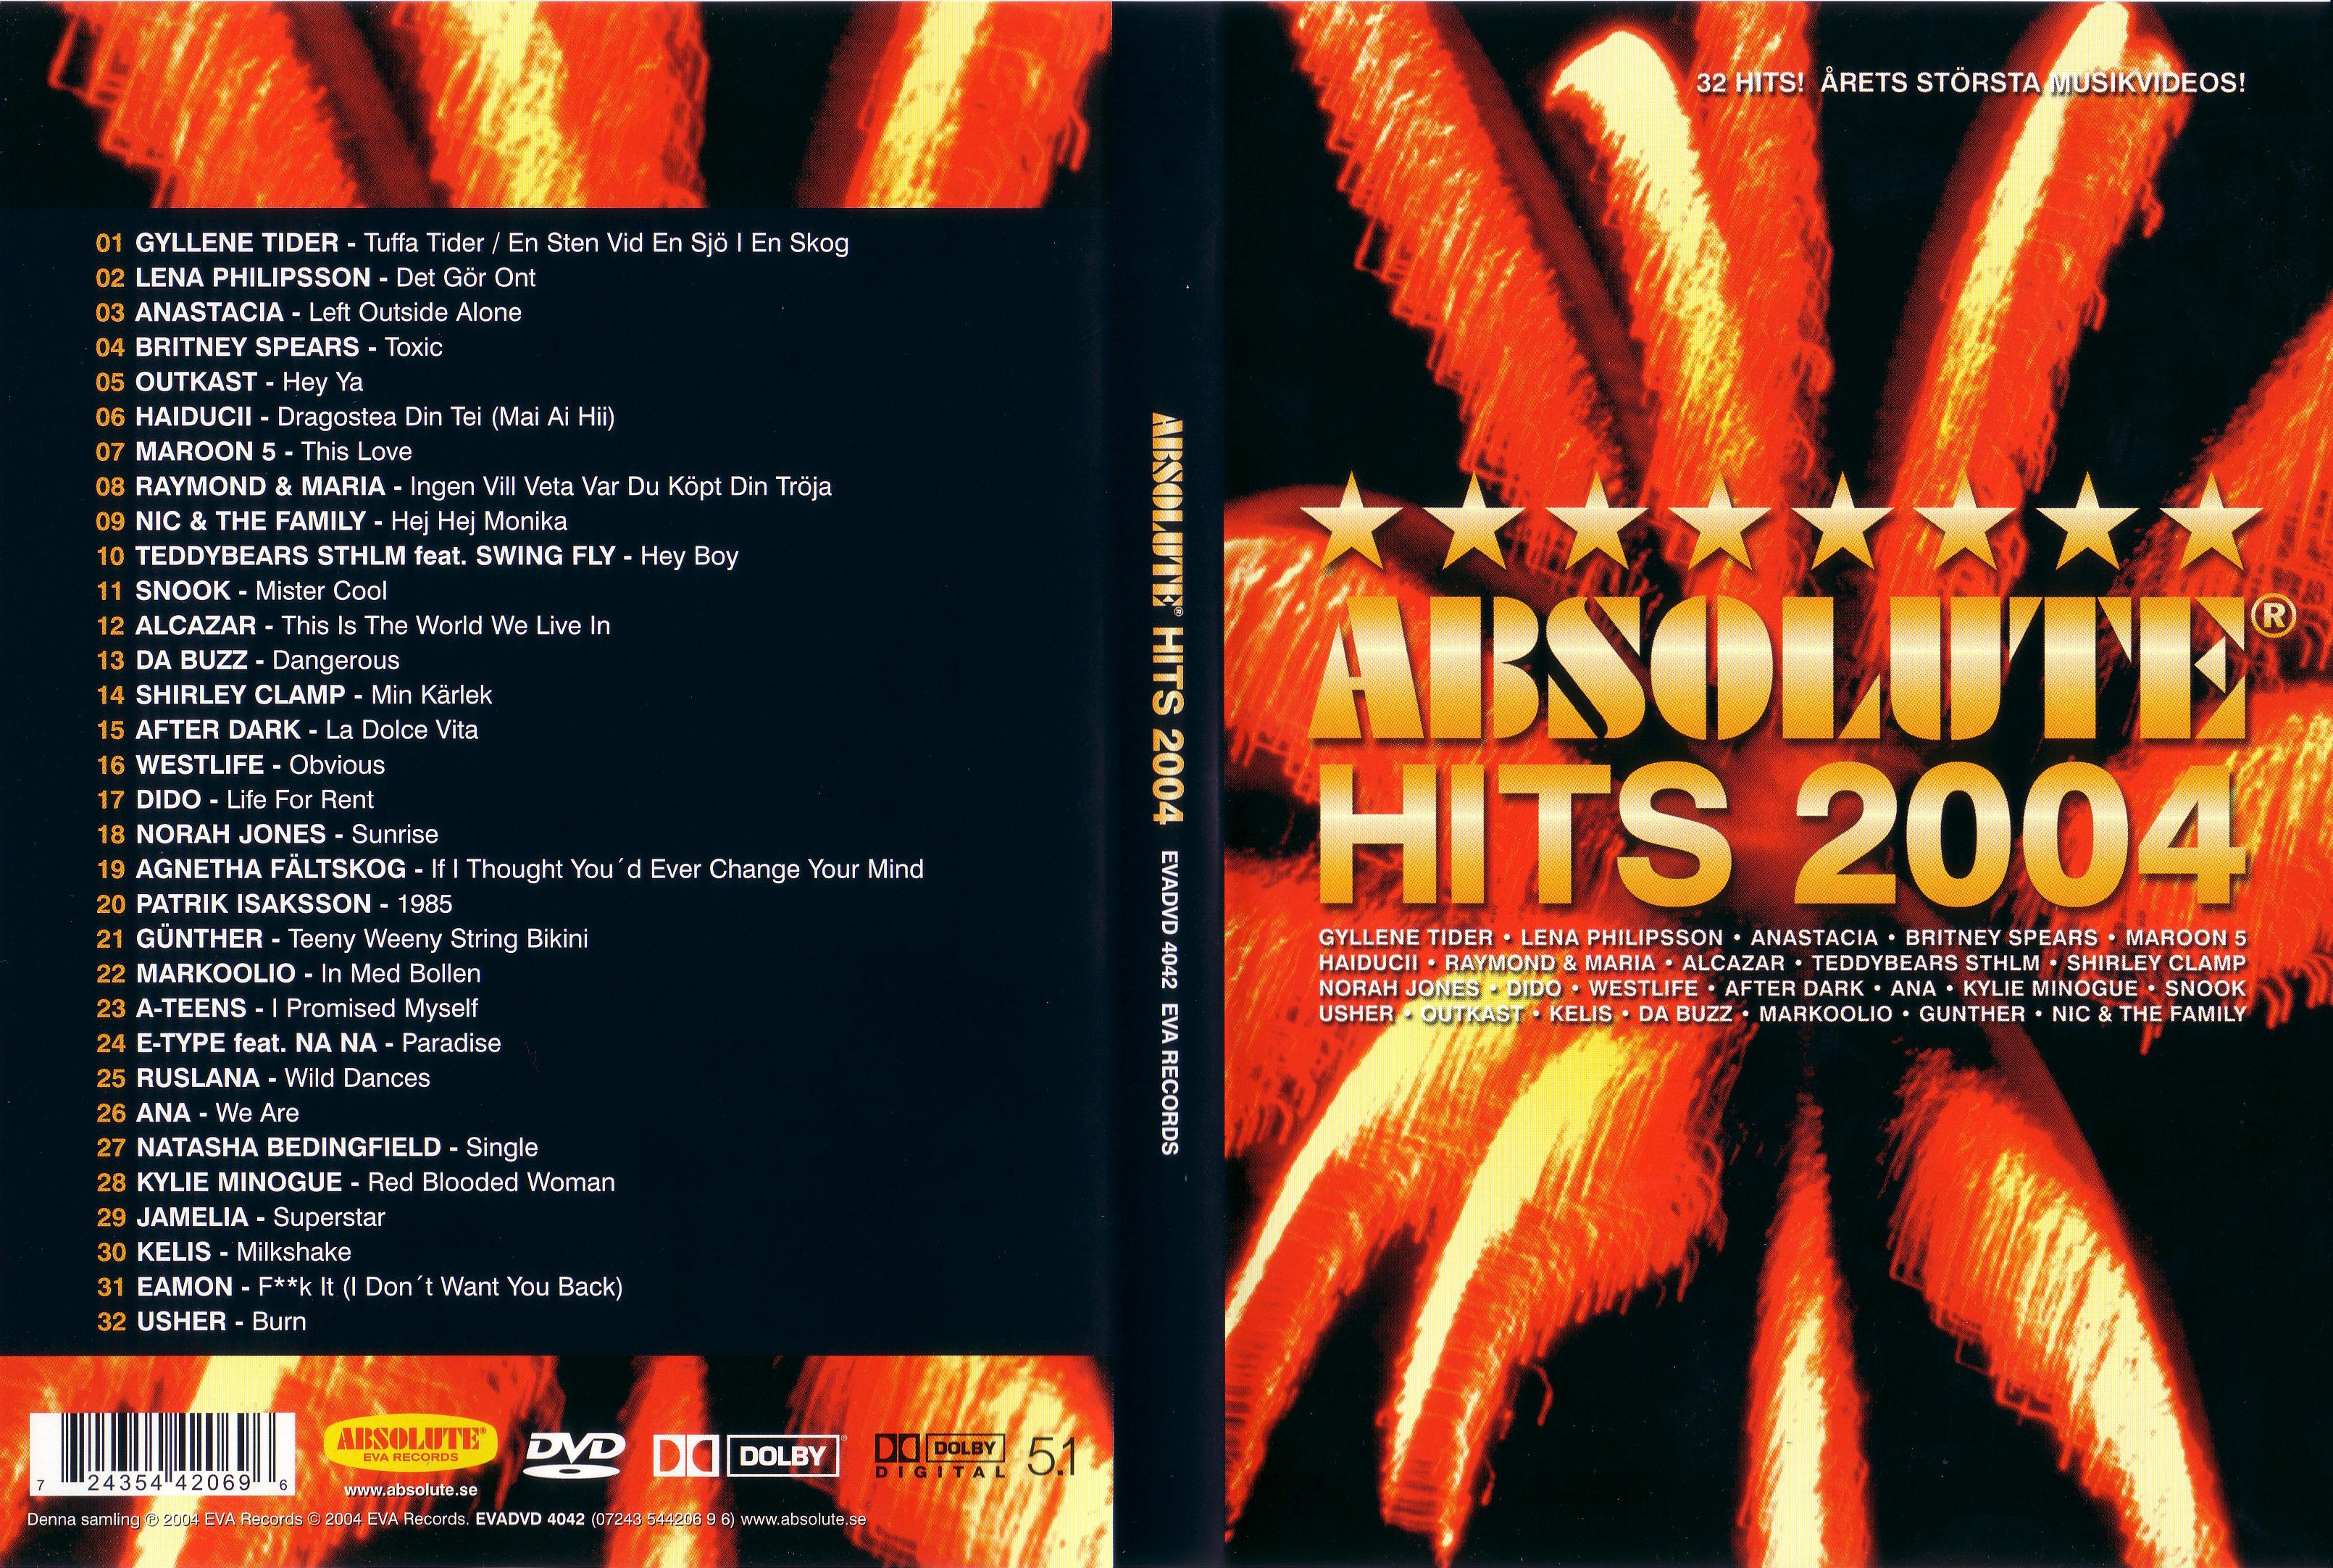 Jaquette DVD Absolute hits 2004